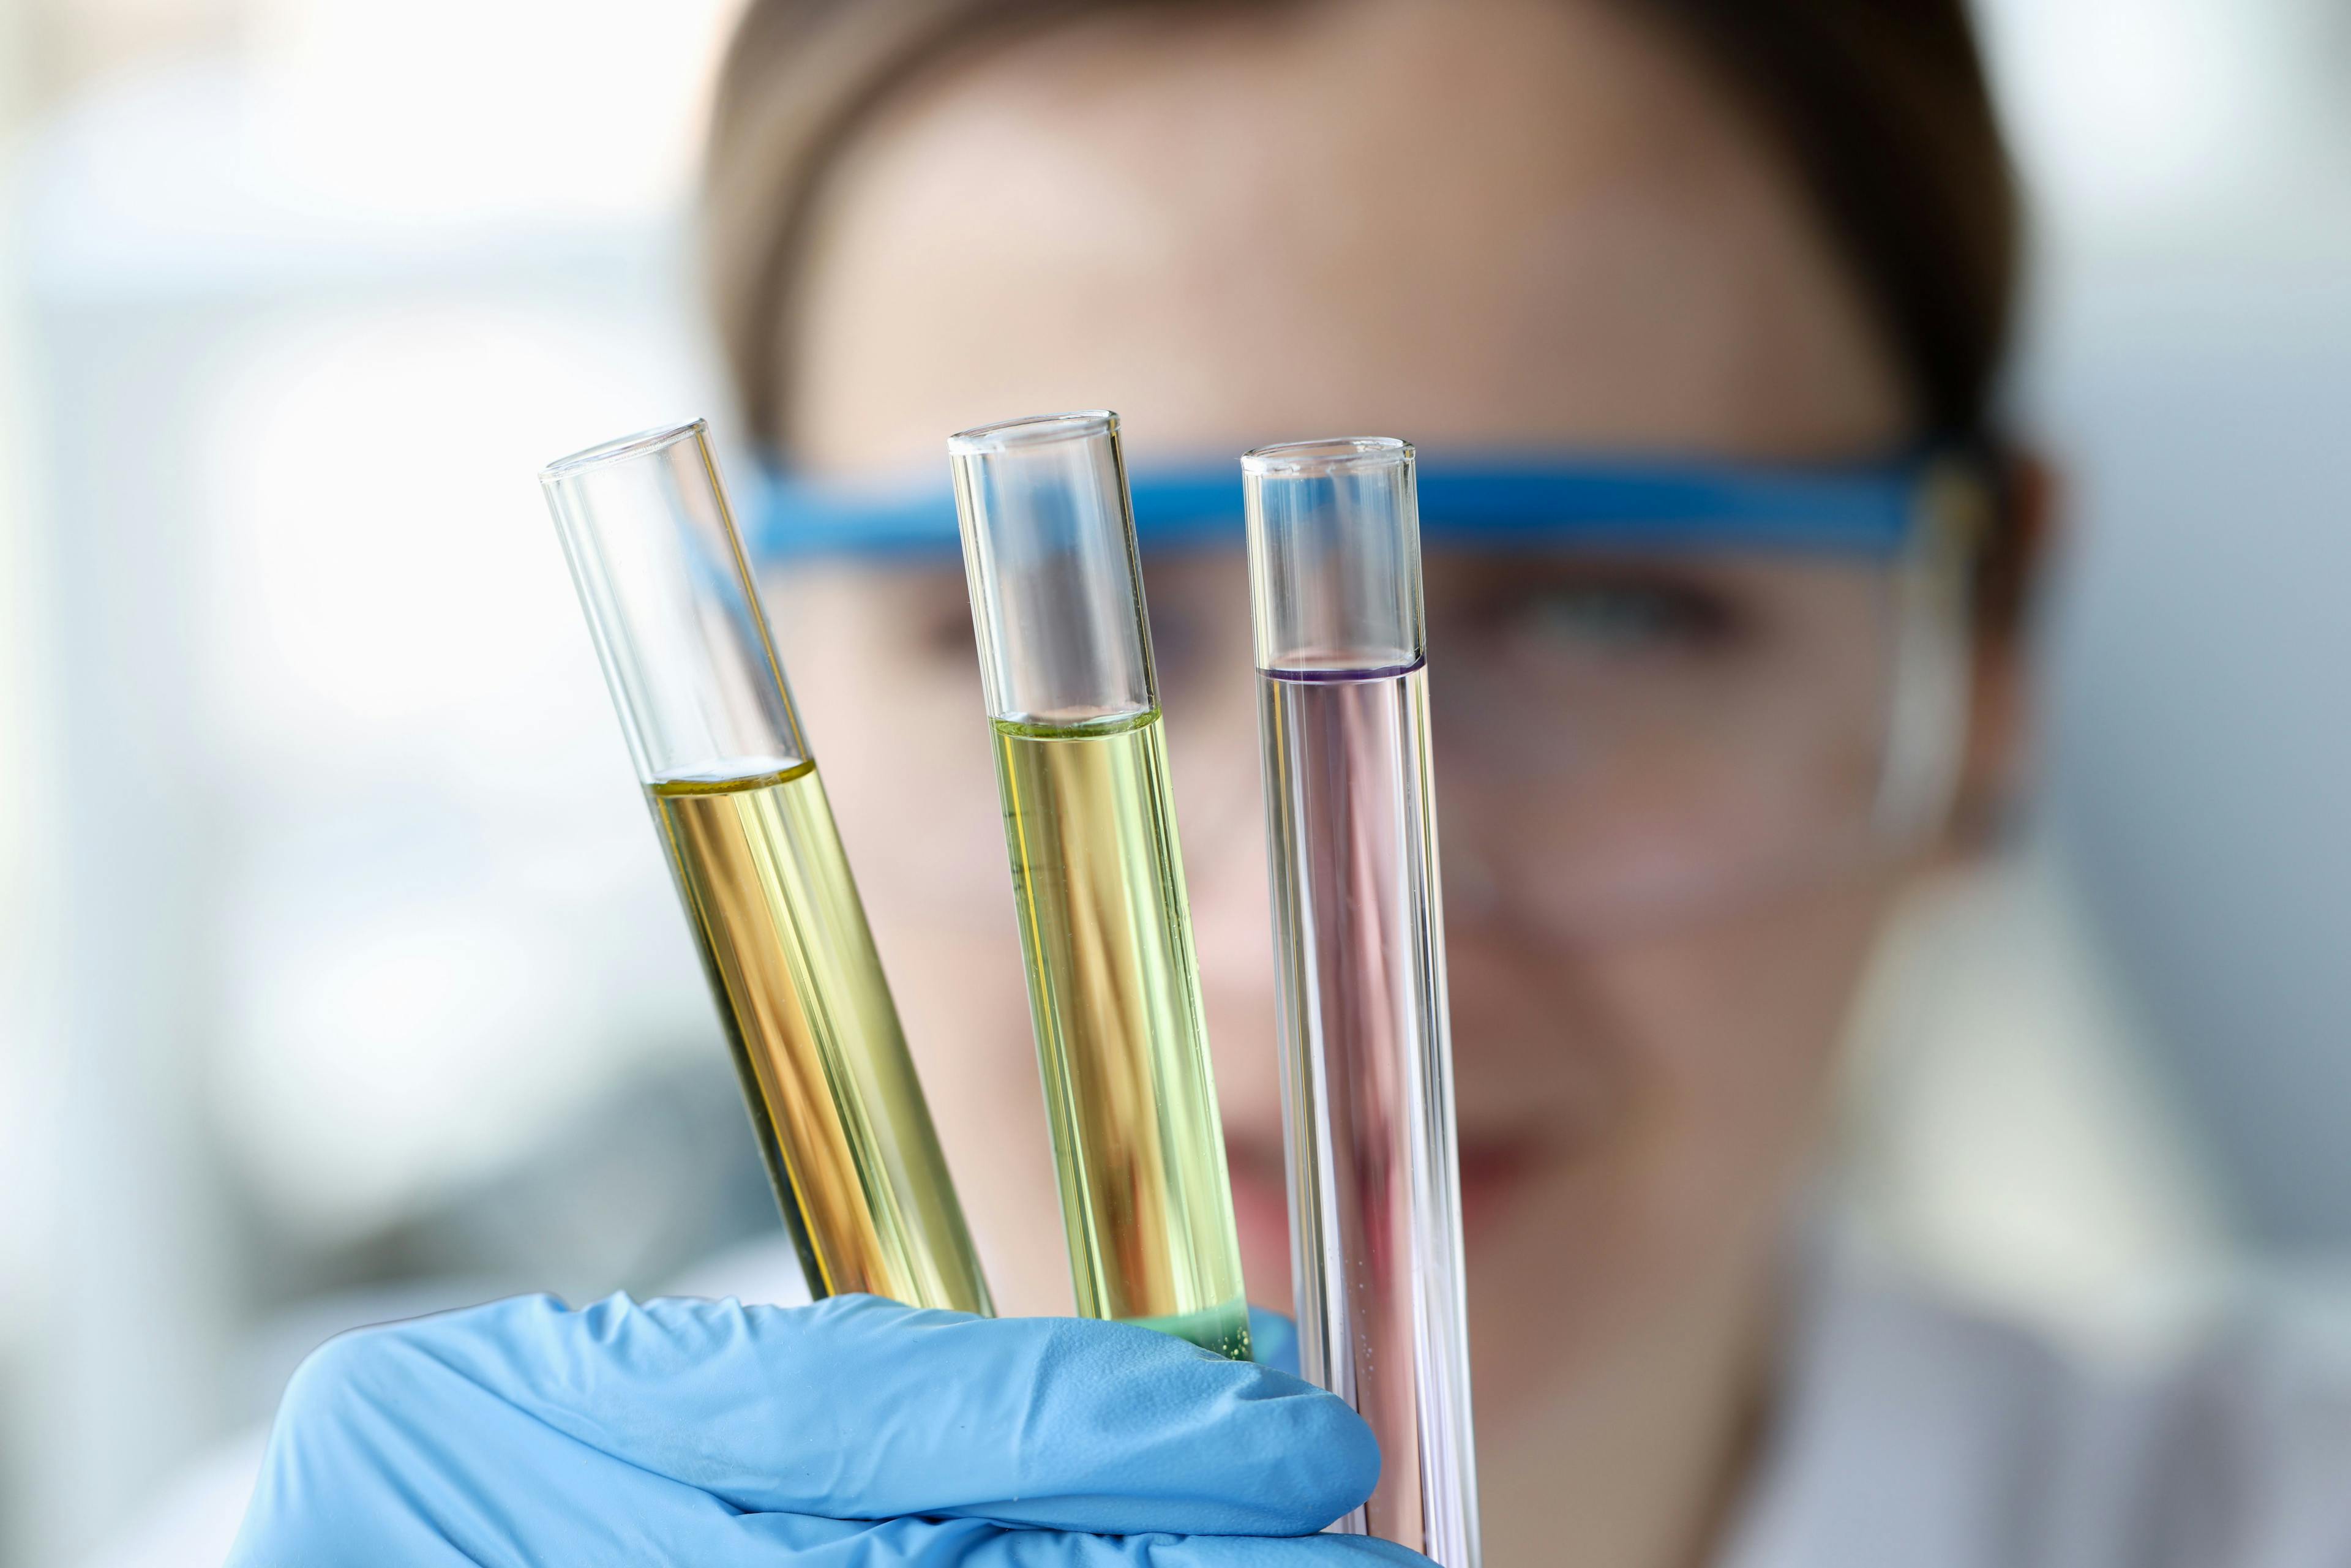 Woman scientist holding test tubes with multicolored liquids in her hands closeup | Image Credit: © megaflopp - stock.adobe.com